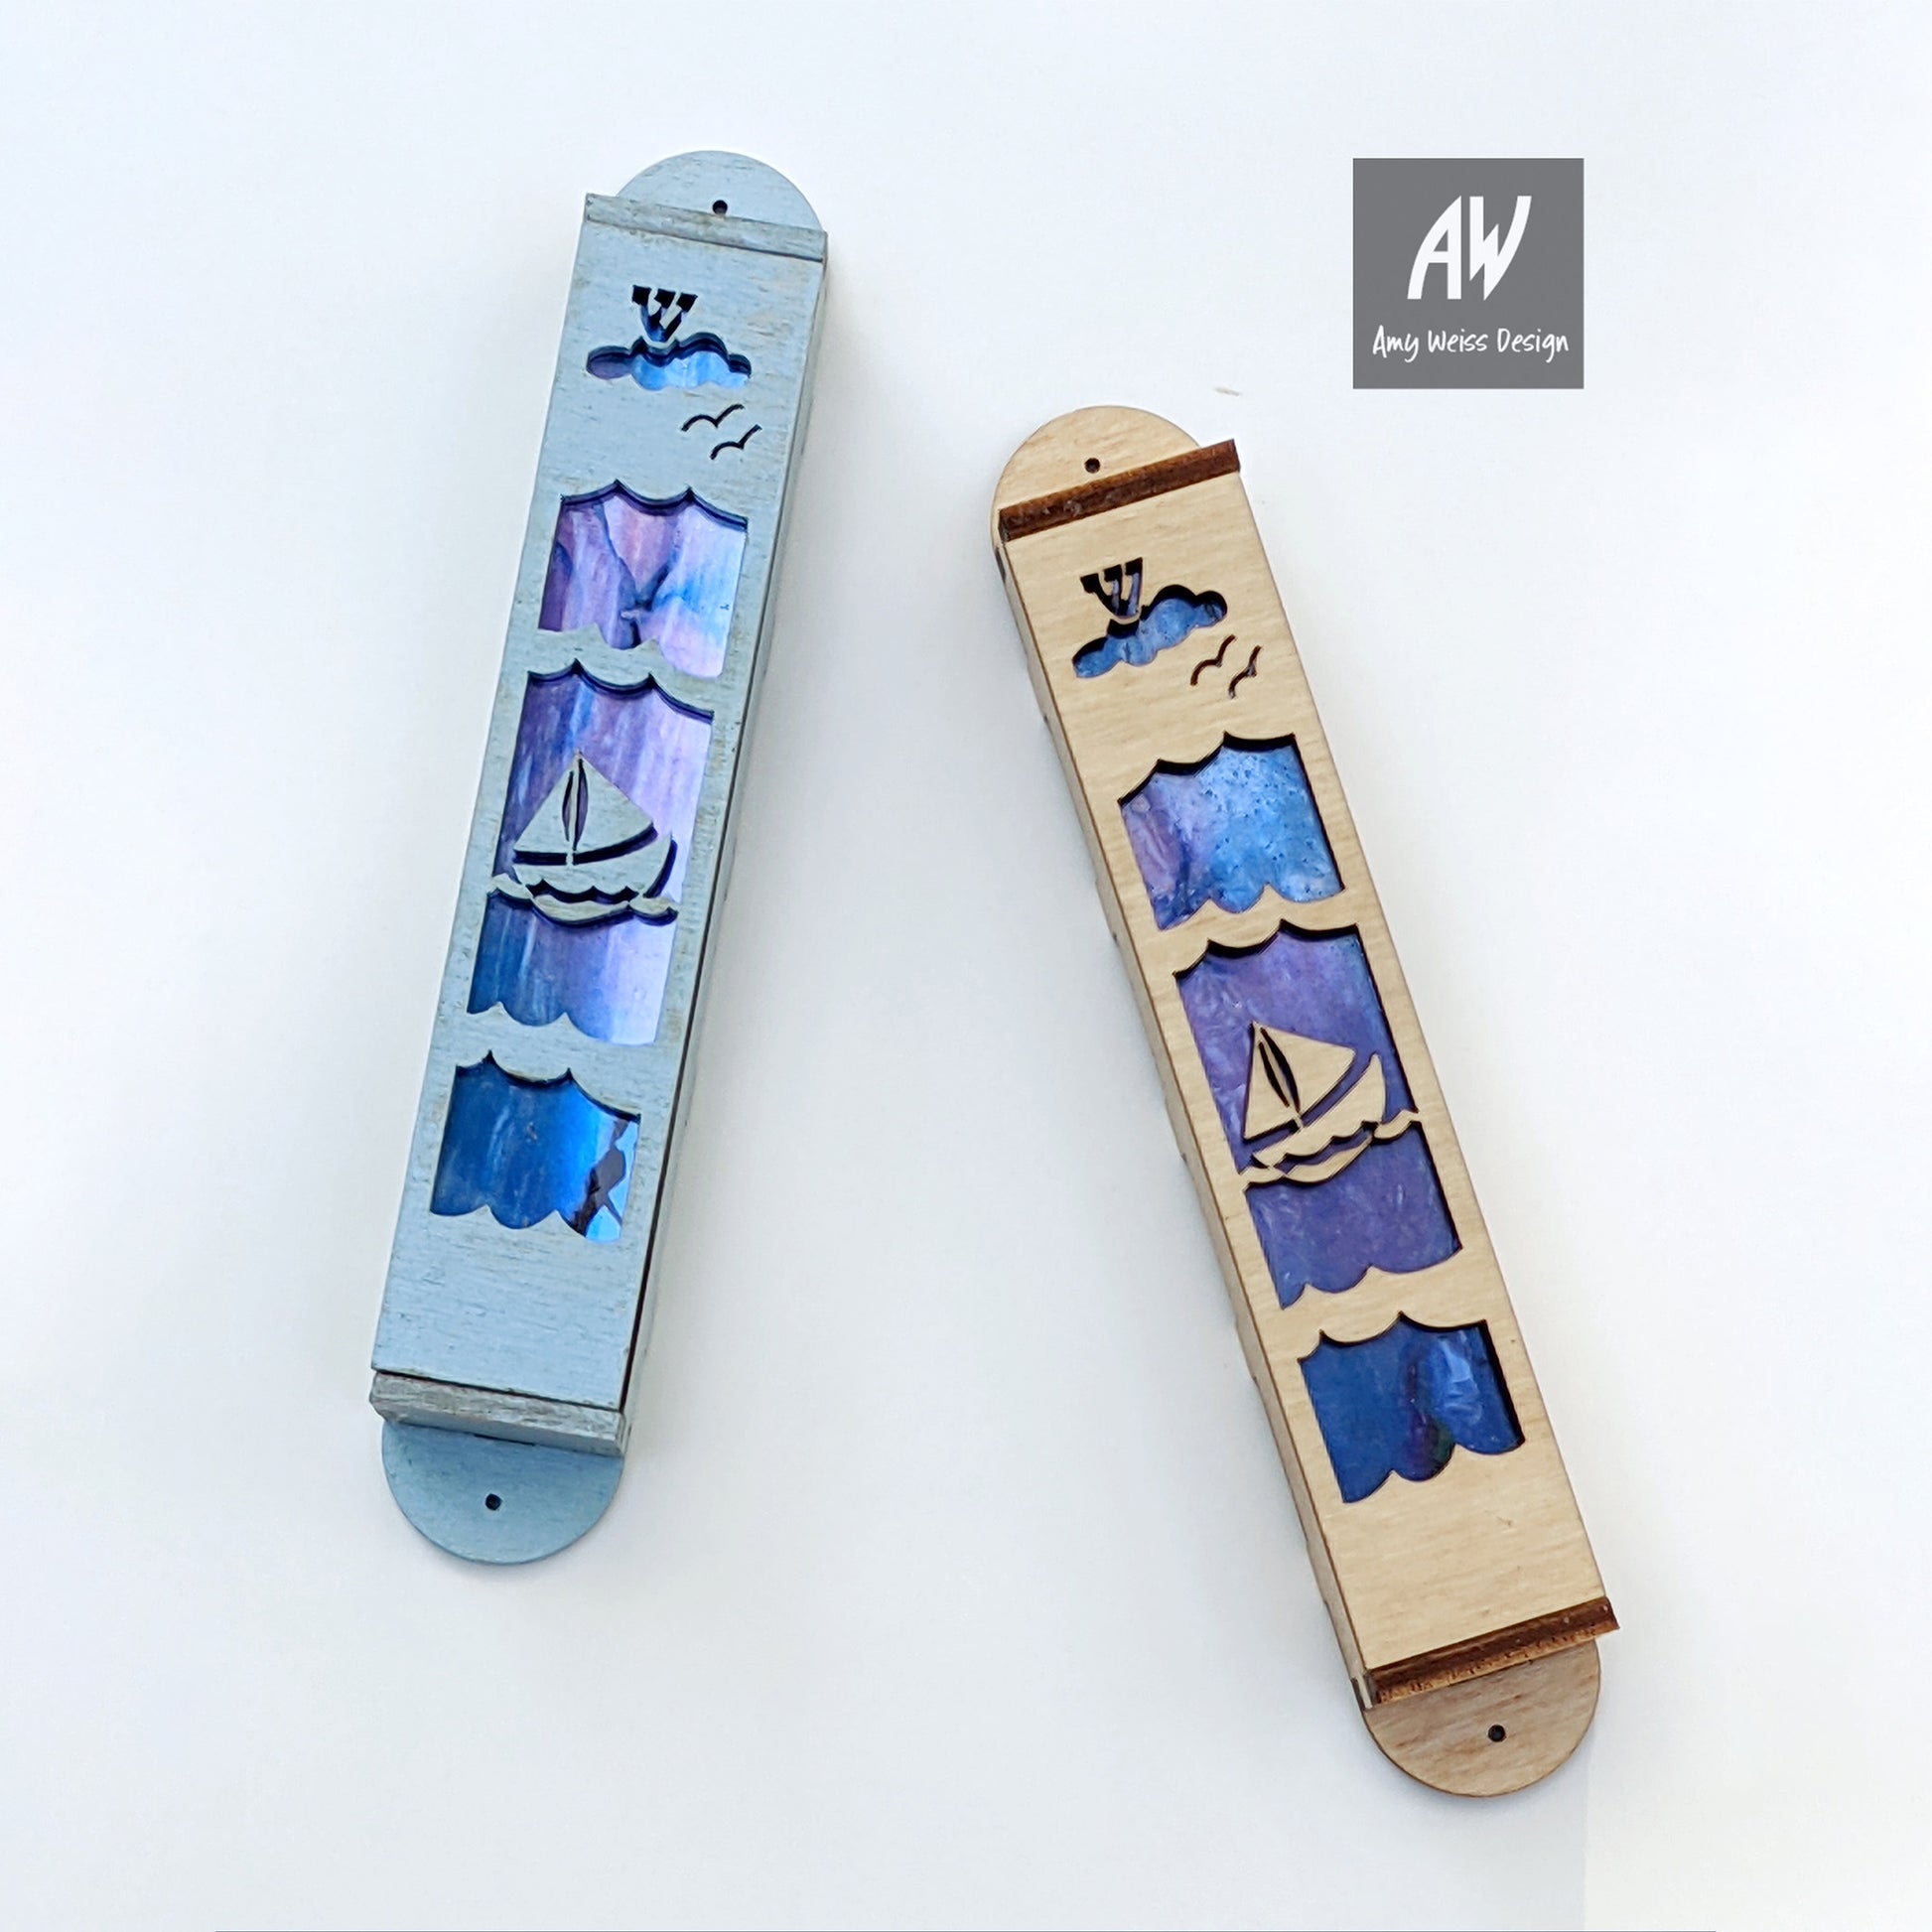 two mezuzahs, one light blur with sailboat, clouds and the letter Shin over blue/purple background and the other mezuzah has the same design with lightly stained wood.